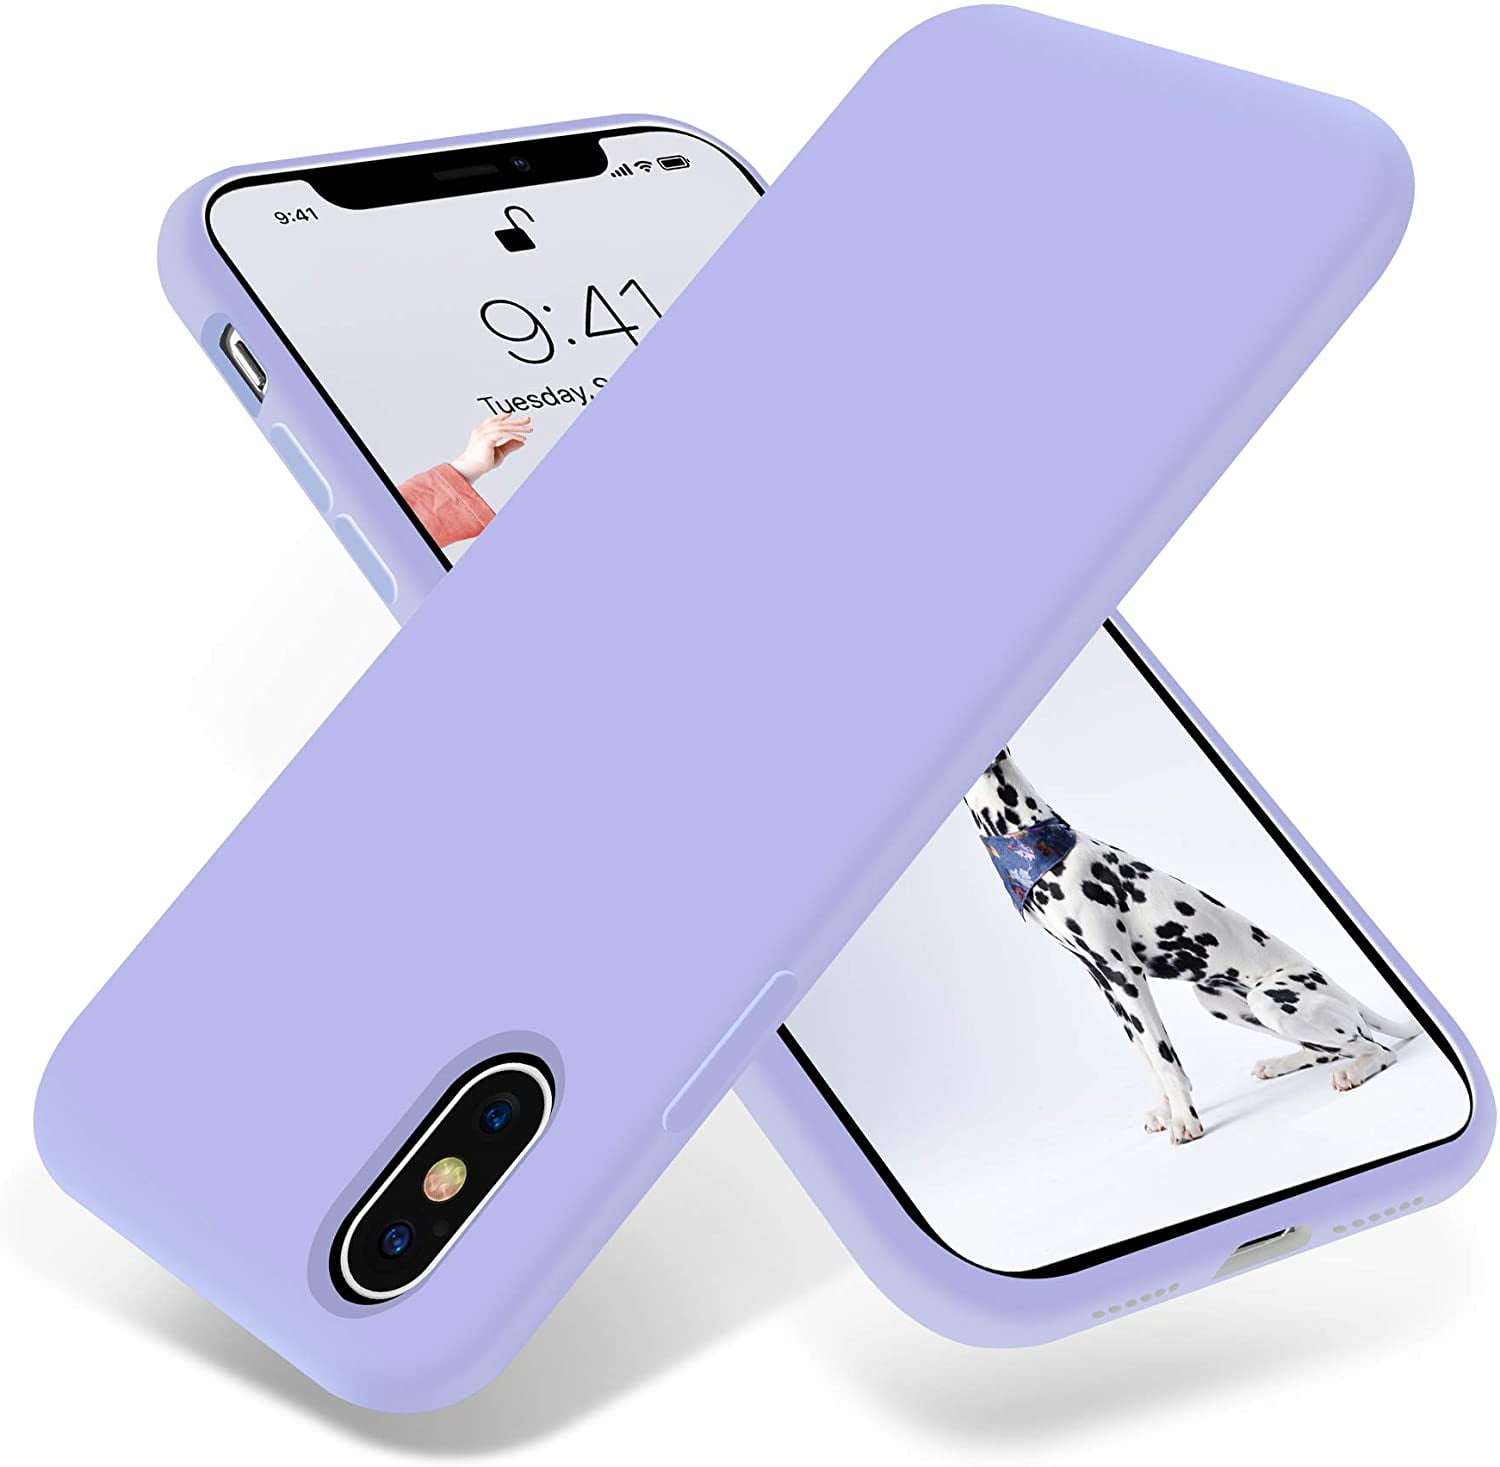 Silicone Case For iPhone XR - Lavender